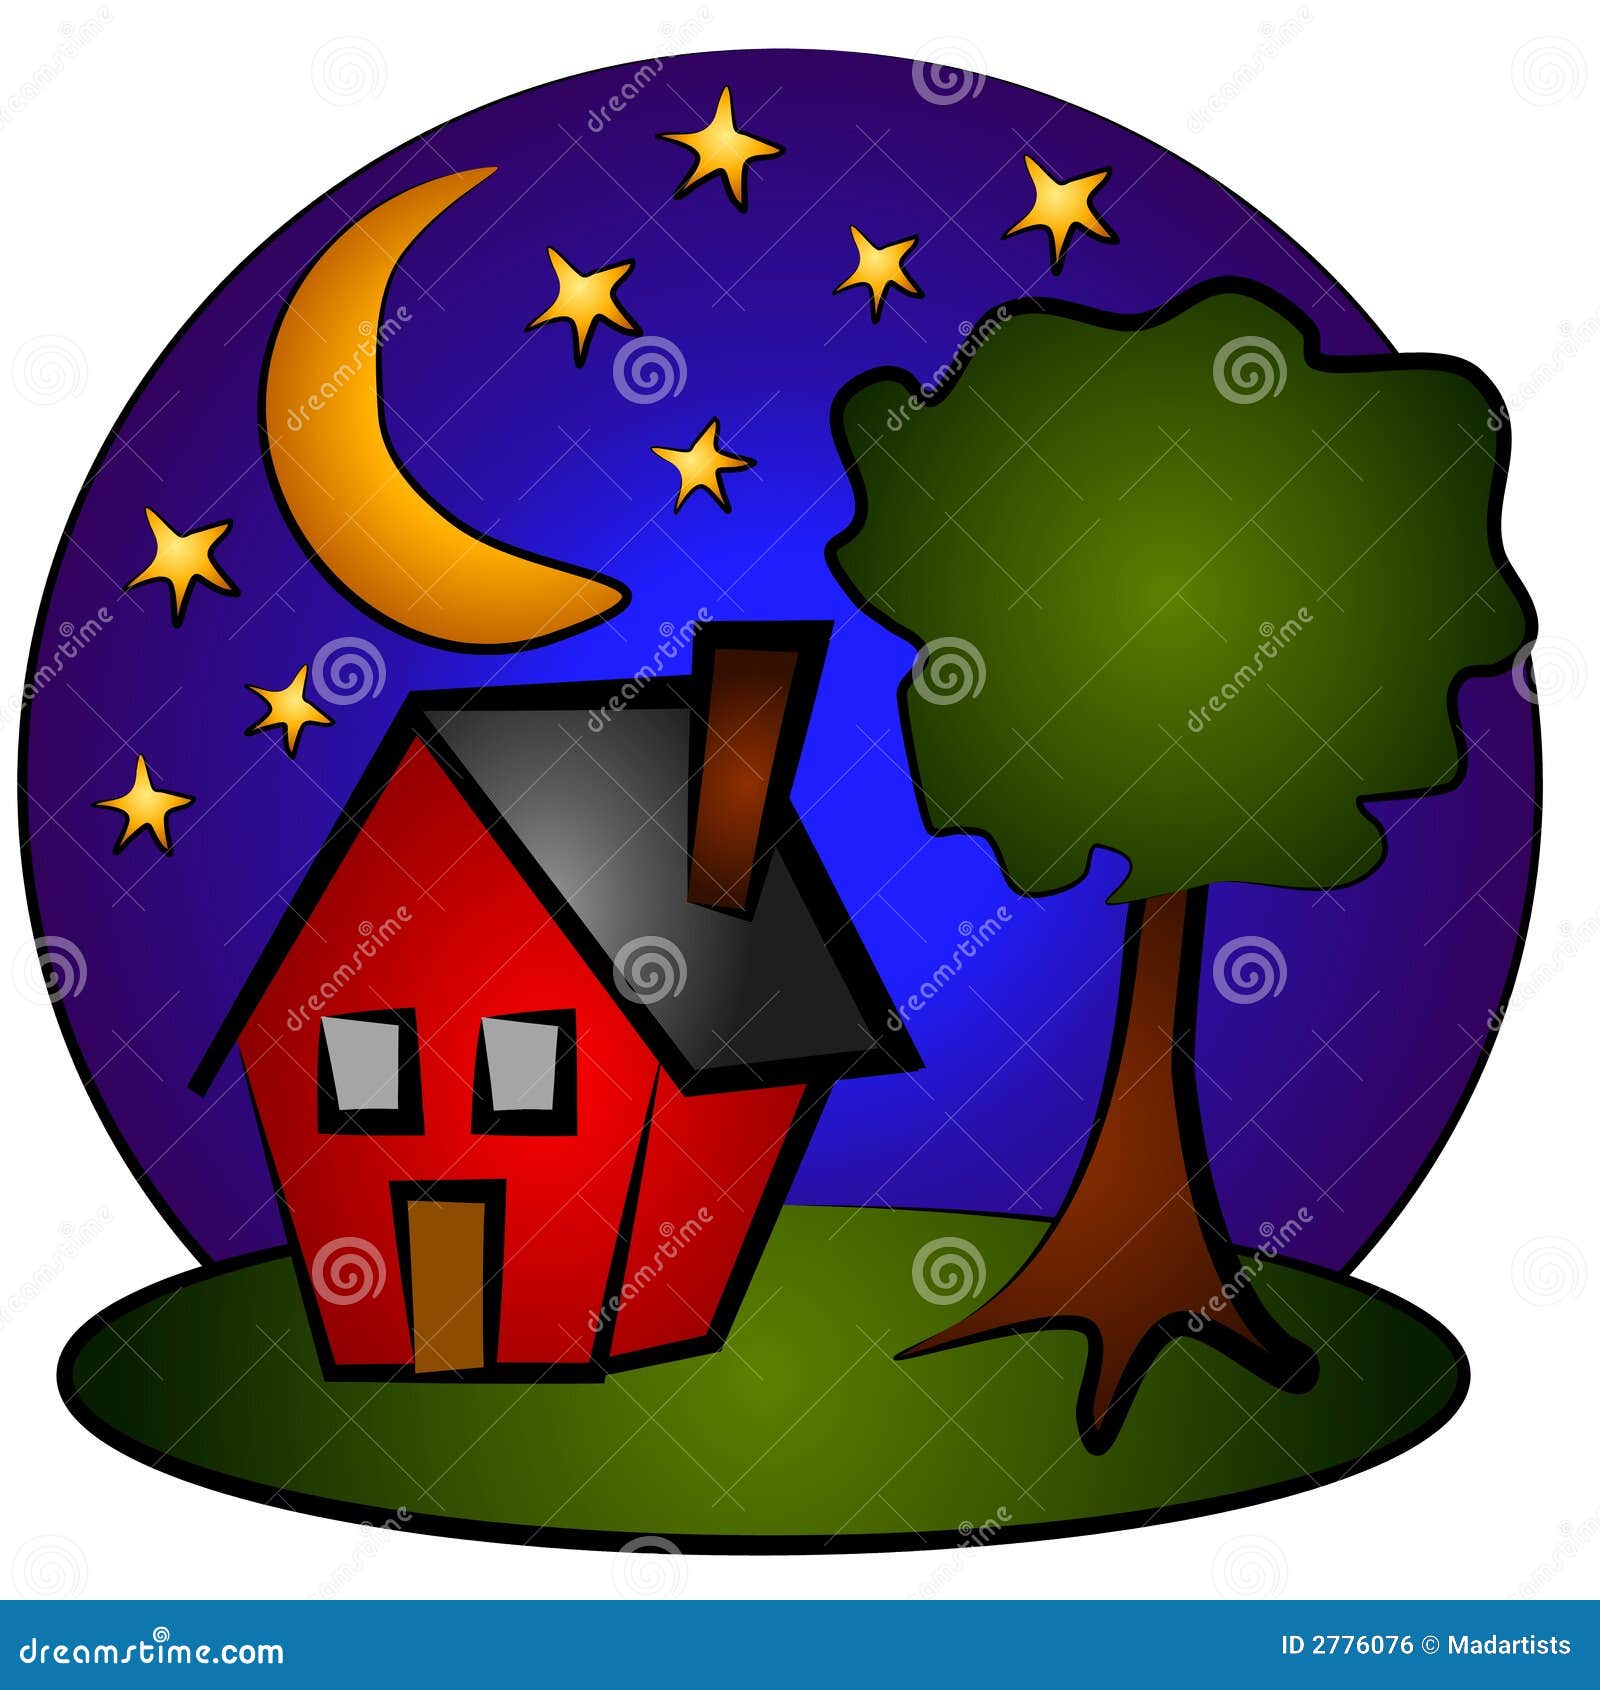 house at night clipart - photo #6